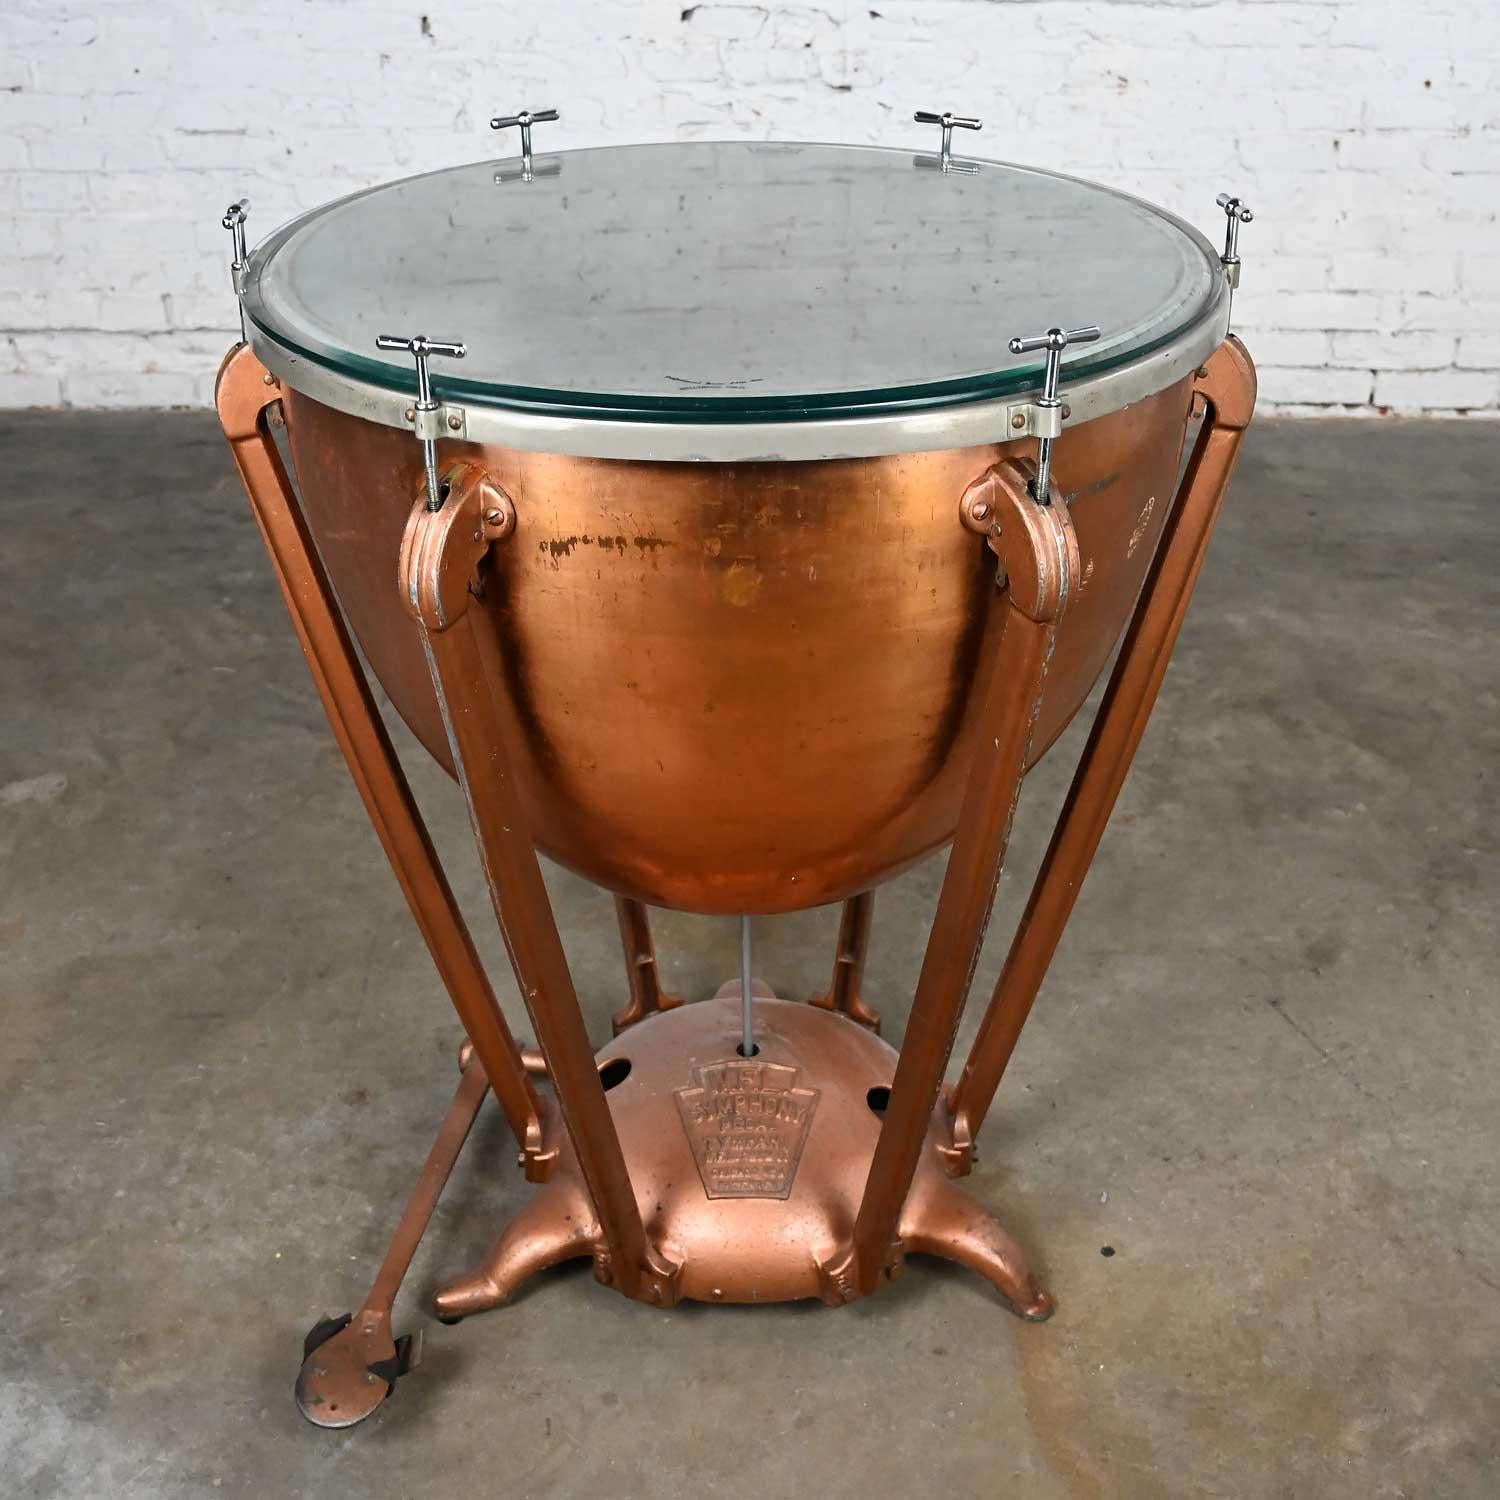 Aluminum Steampunk Industrial Copper Timpani Kettle Drum Center Table by WFL Drum Co  For Sale